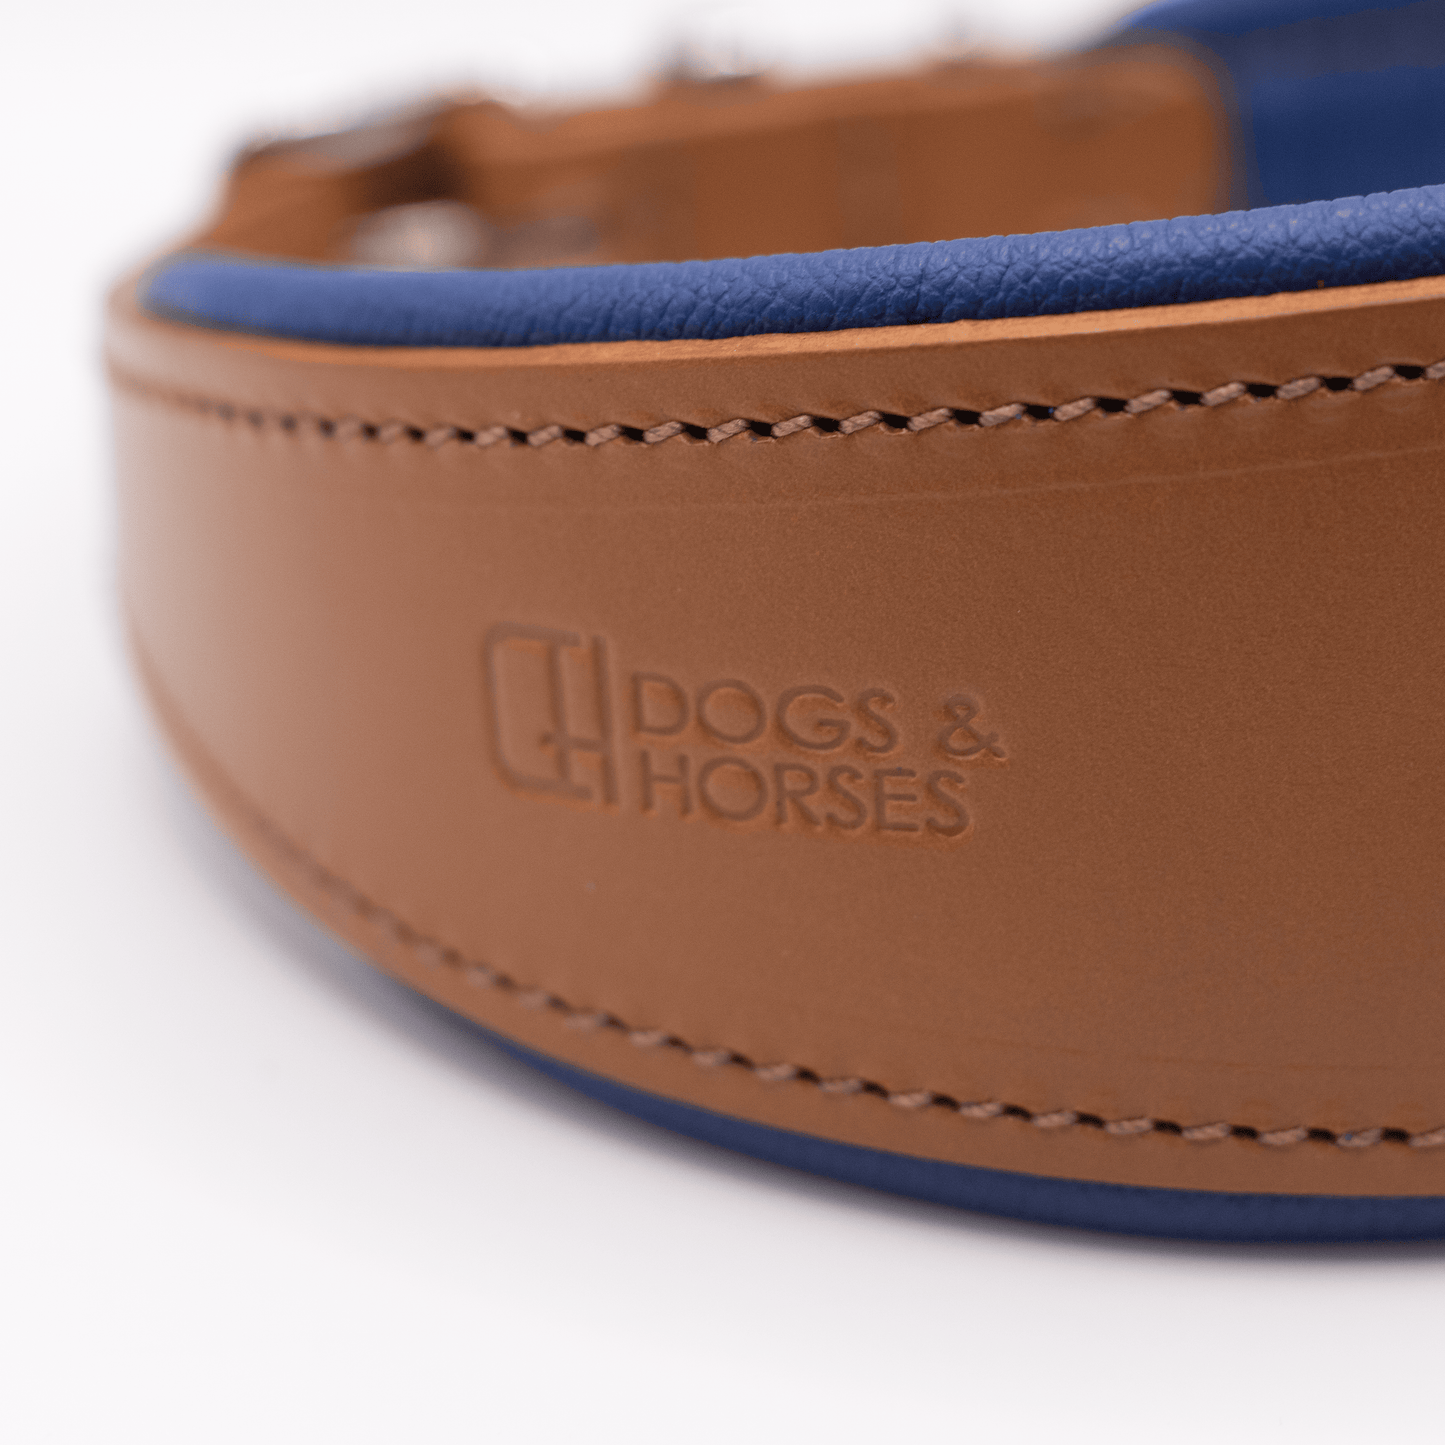 D&H Padded Leather Hound Collar Tan and Electric Blue